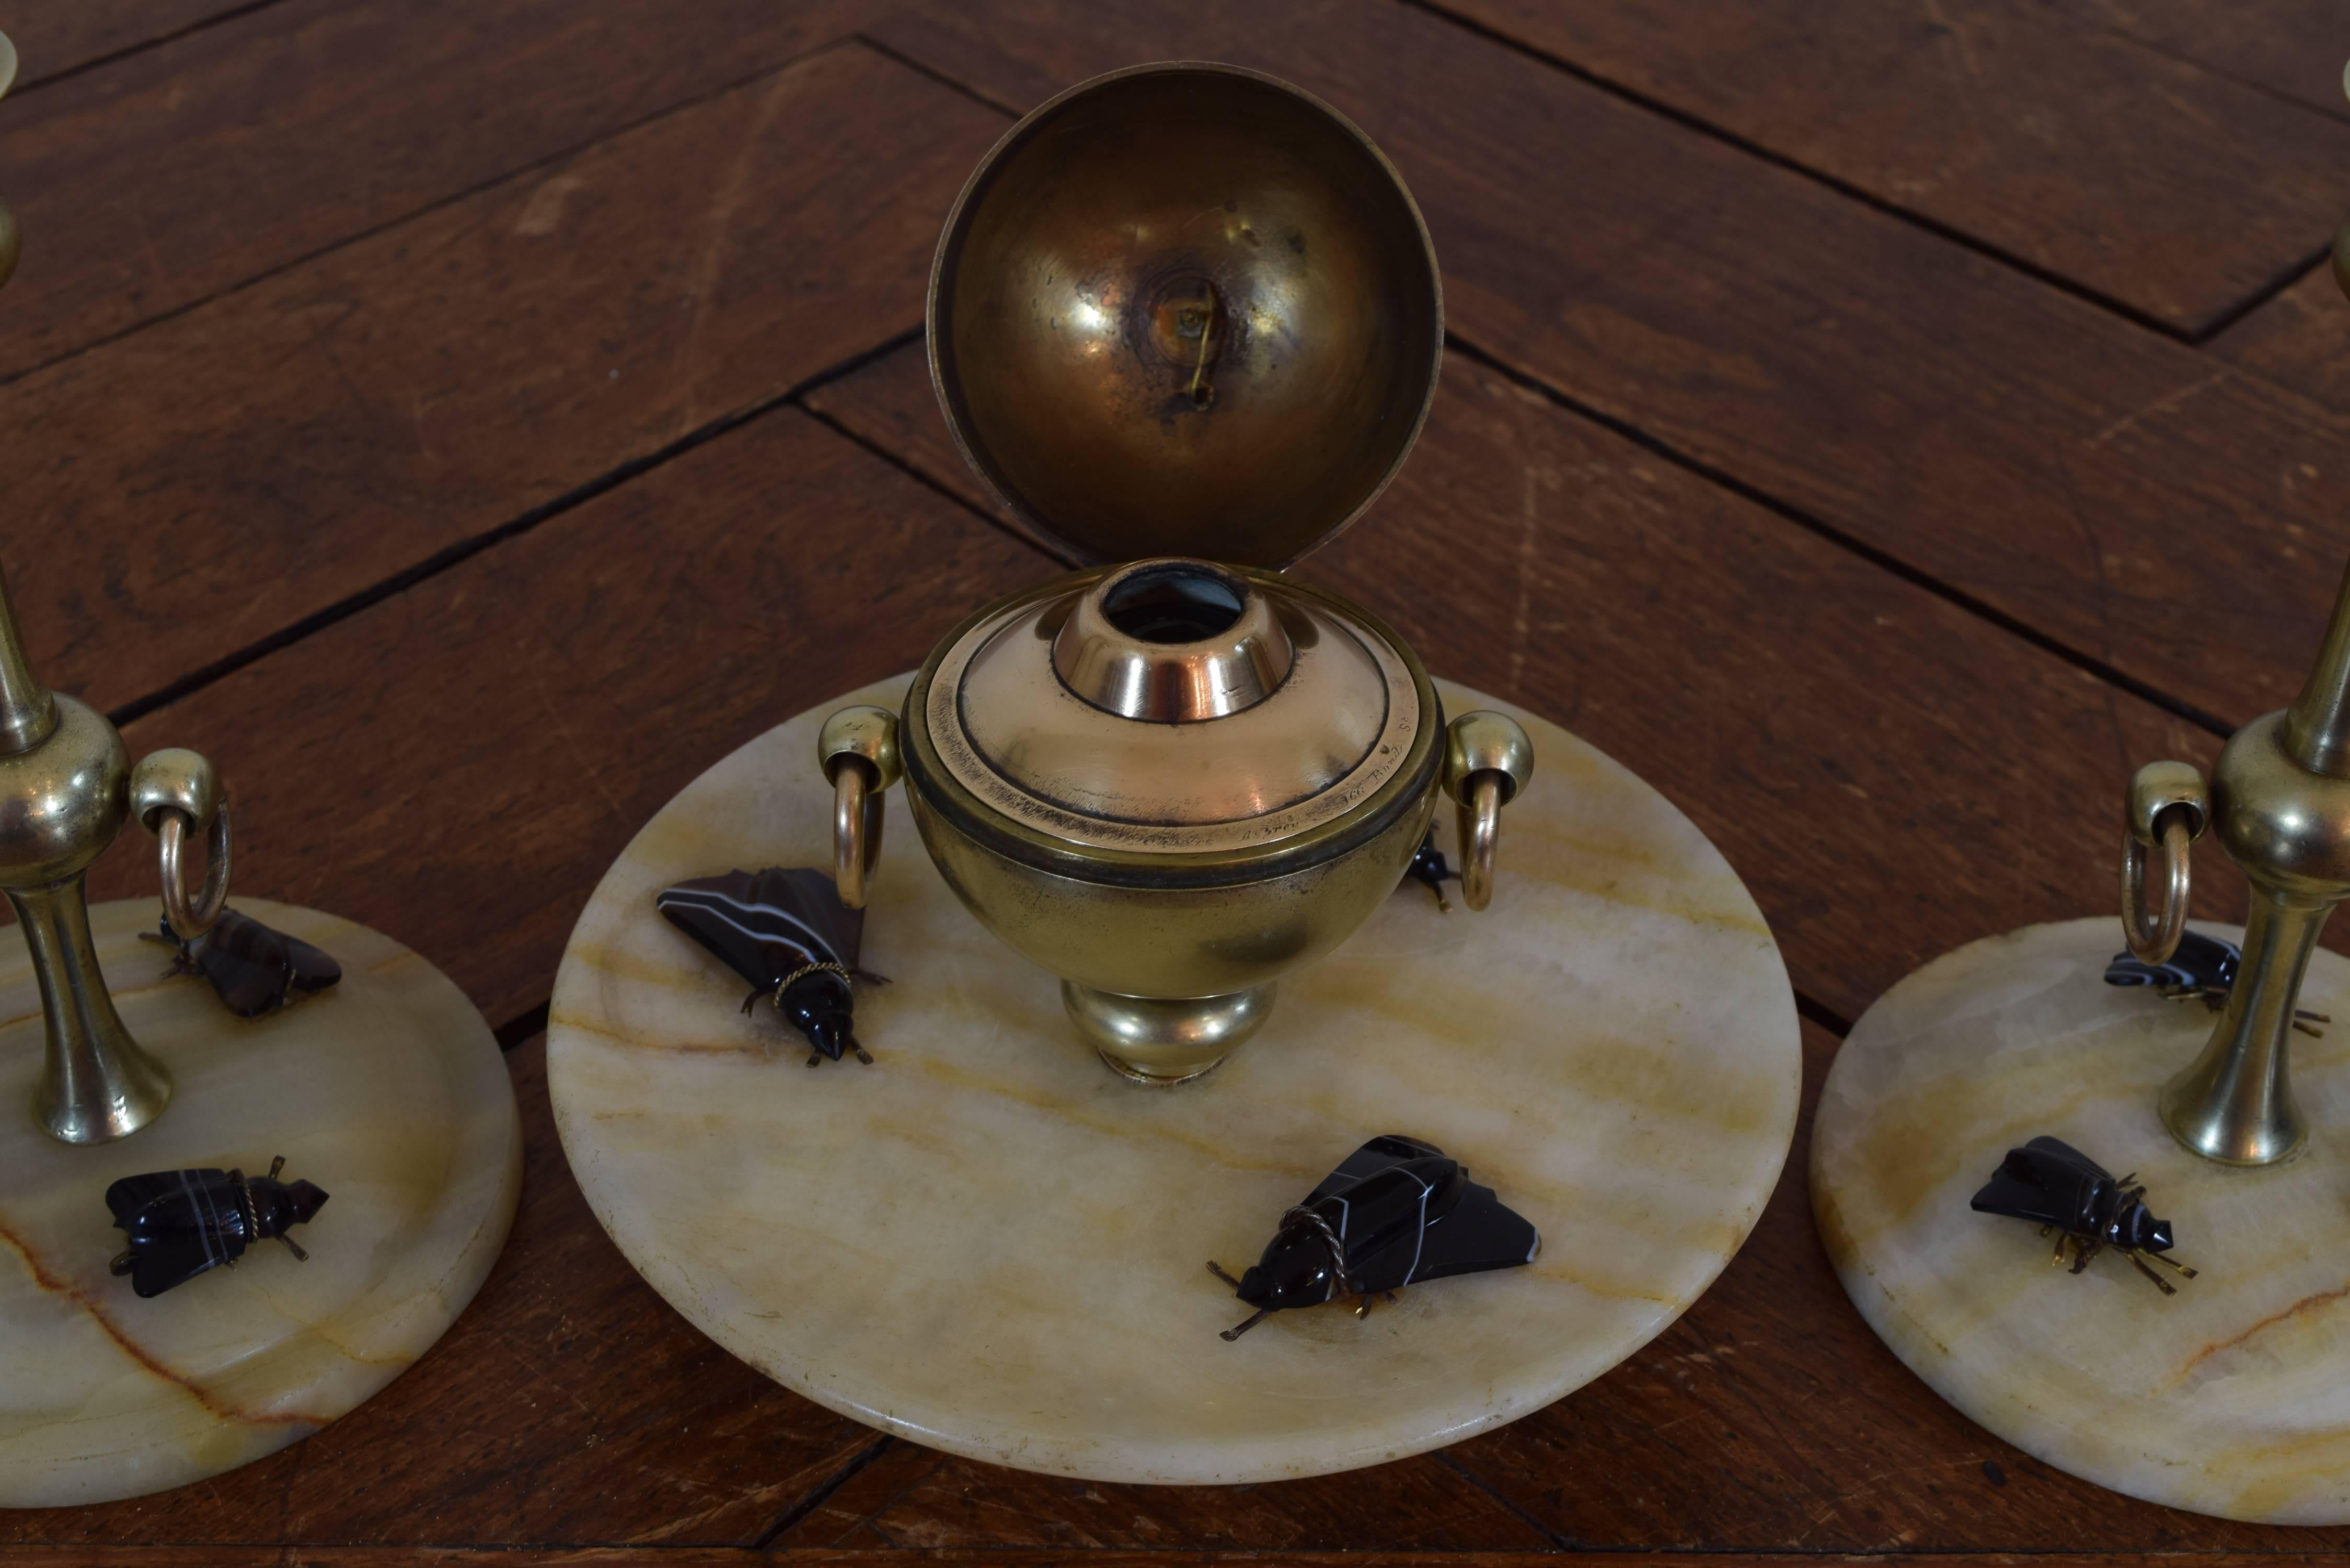 The inkwell having domed and hinged lid with brass rings with a lower tray of agate decorated with dark agate flies, resting on a brass base.  the candlesticks of slender proportion and having same brass handles, the agate bases decorated with dark